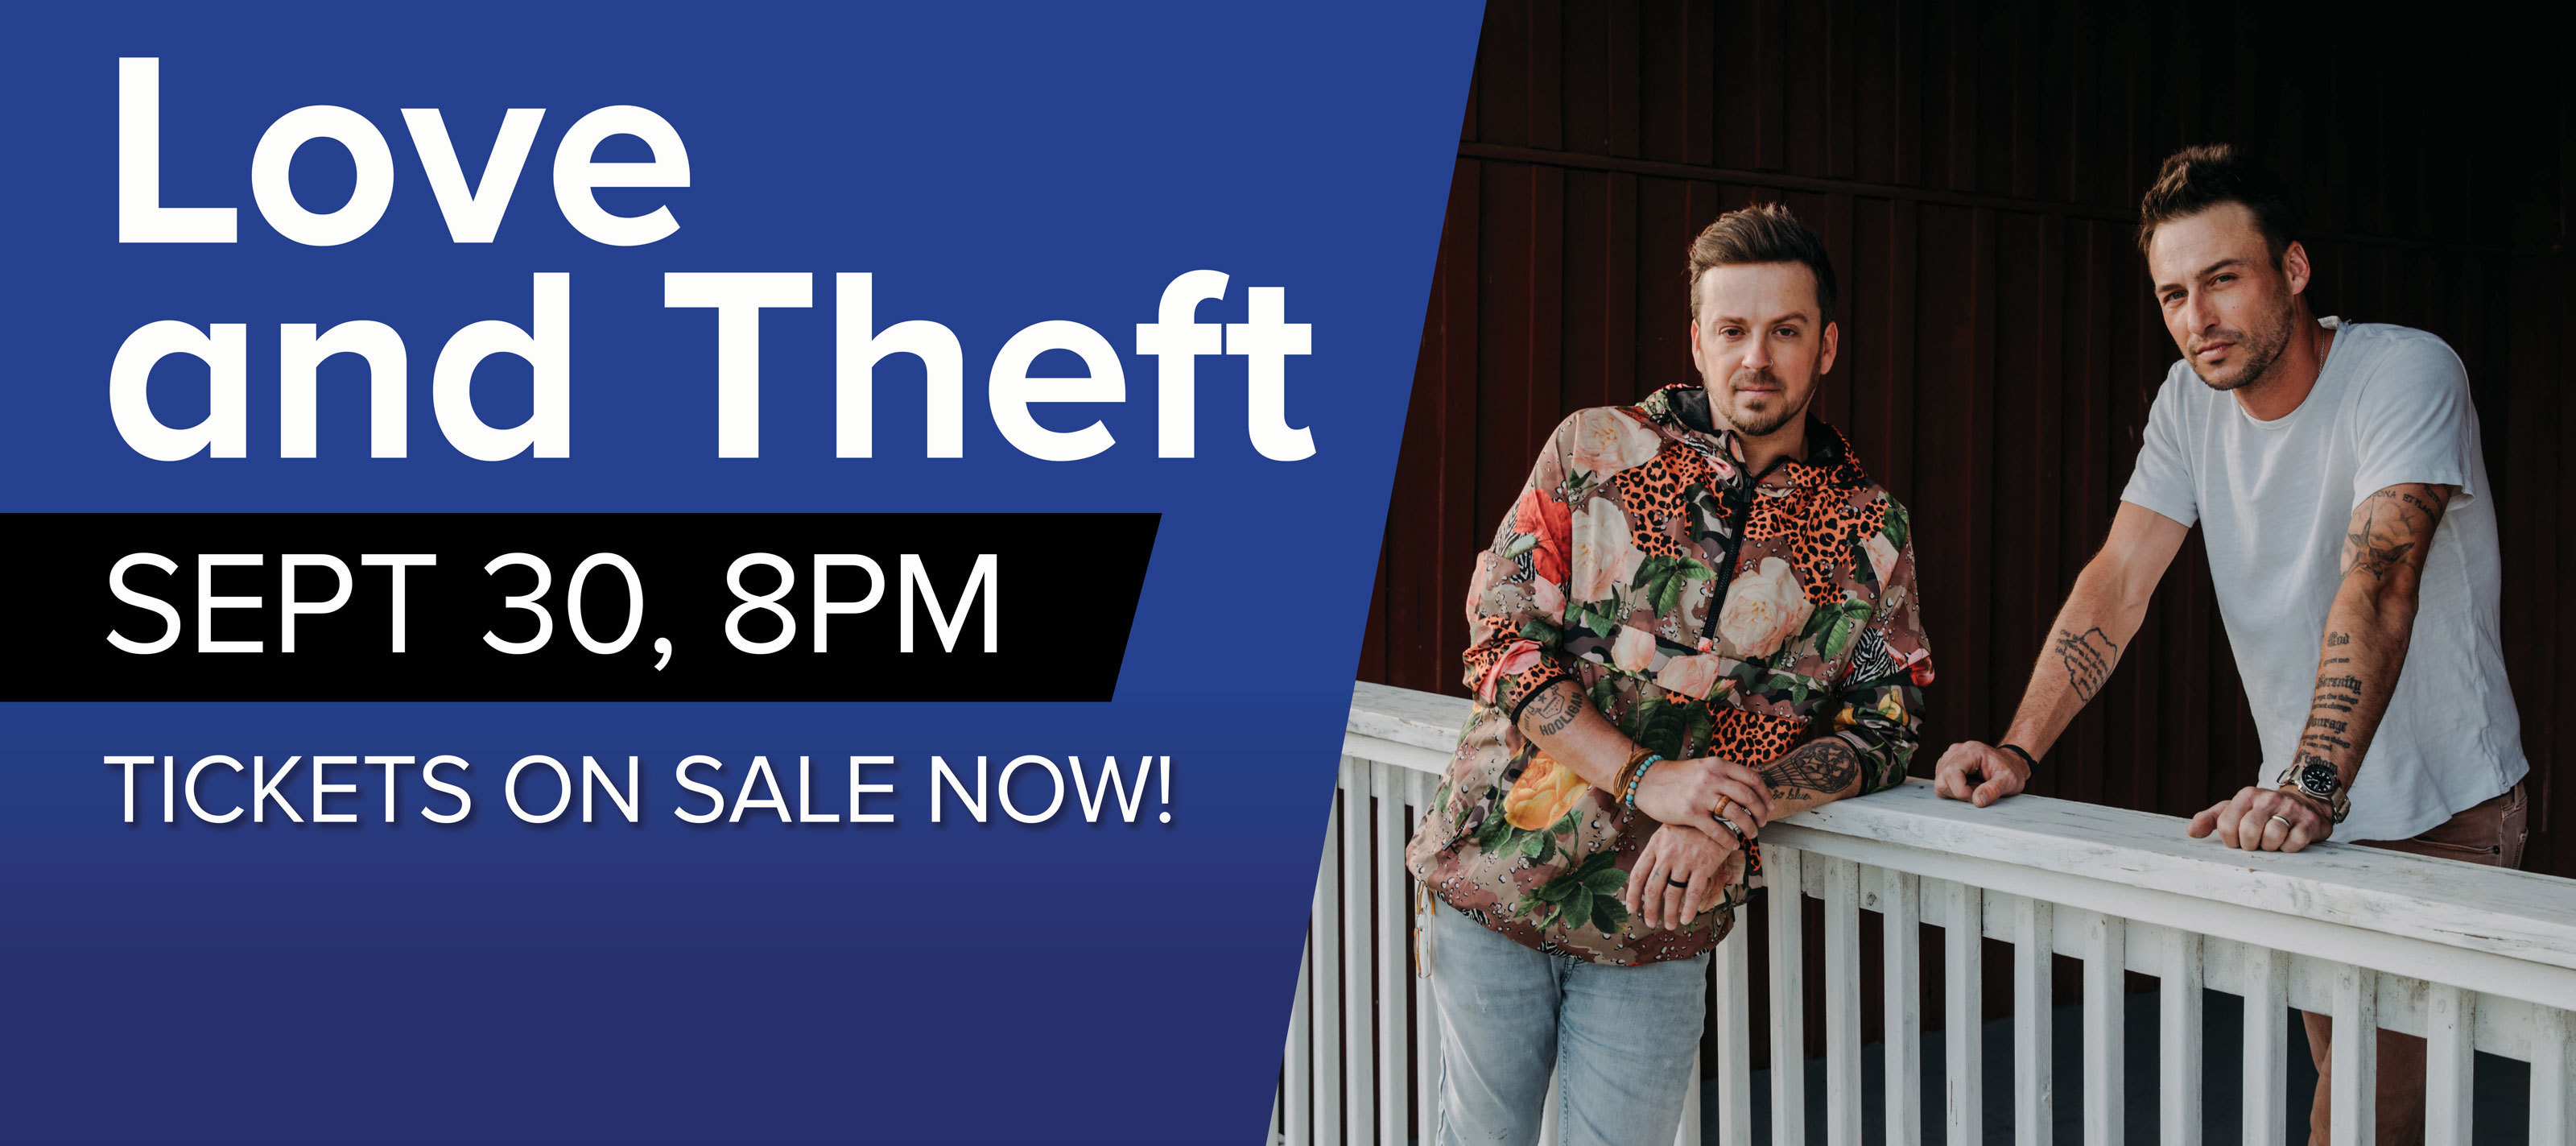 love and theft sept 30 8pm tickets on sale now